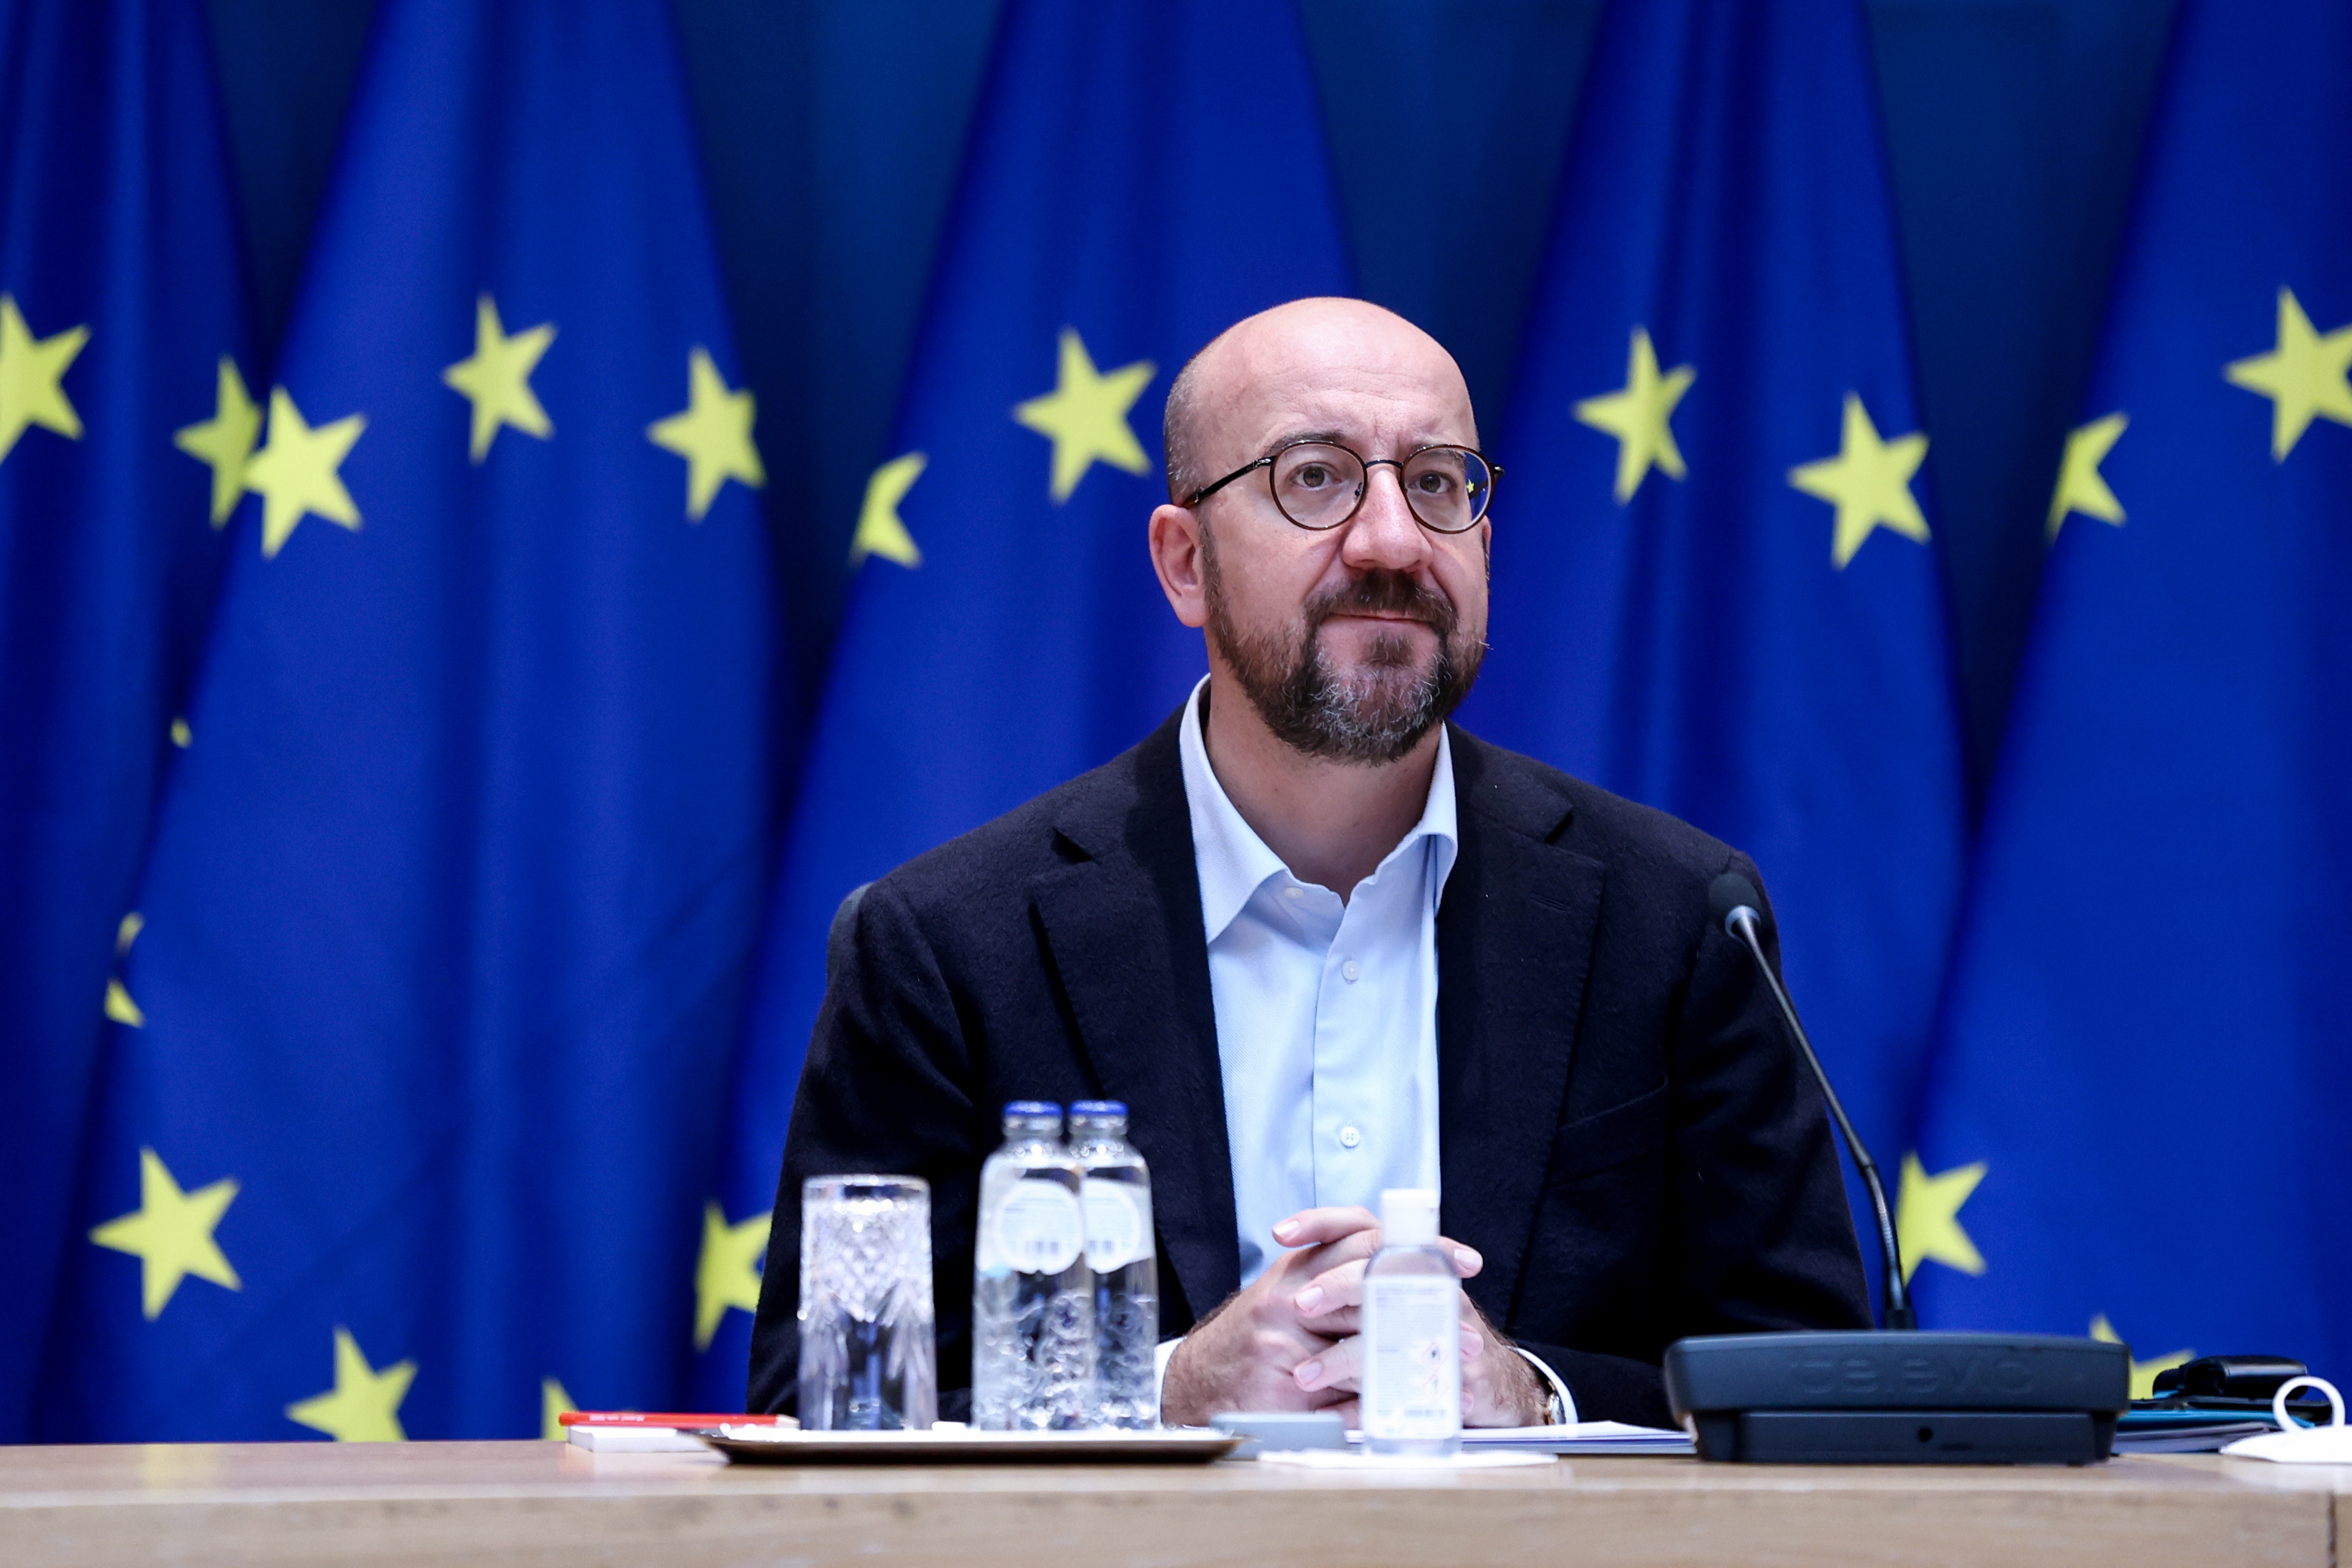 European Council President Michel holds video conference in Brussels